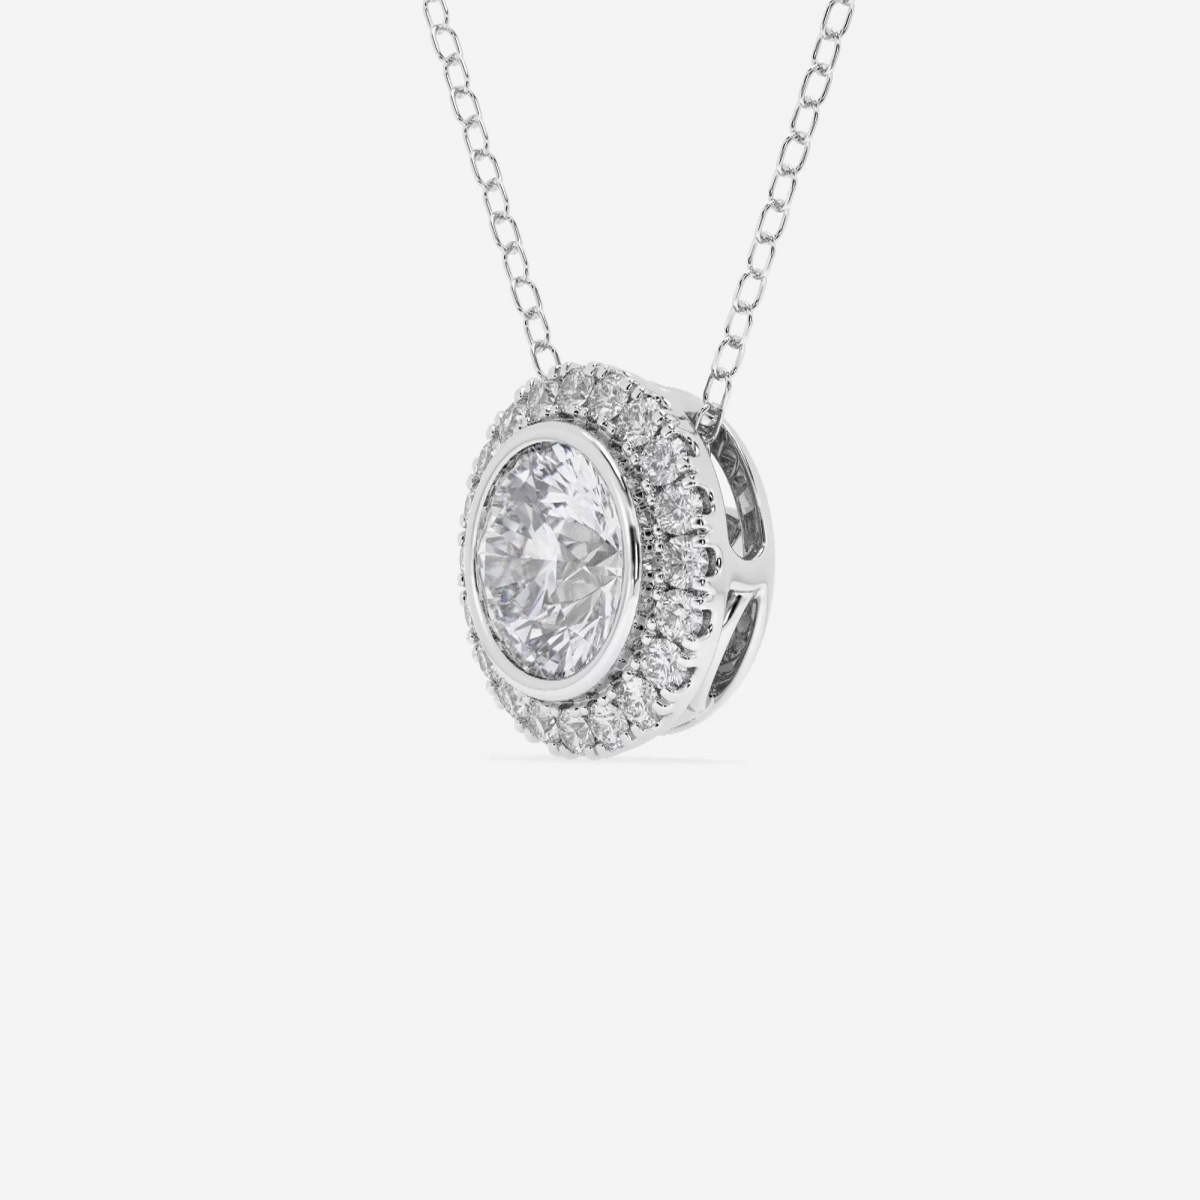 Additional Image 1 for  1 1/5 ctw Round Lab Grown Diamond Bezel Set Halo Pendant with Adjustable Chain